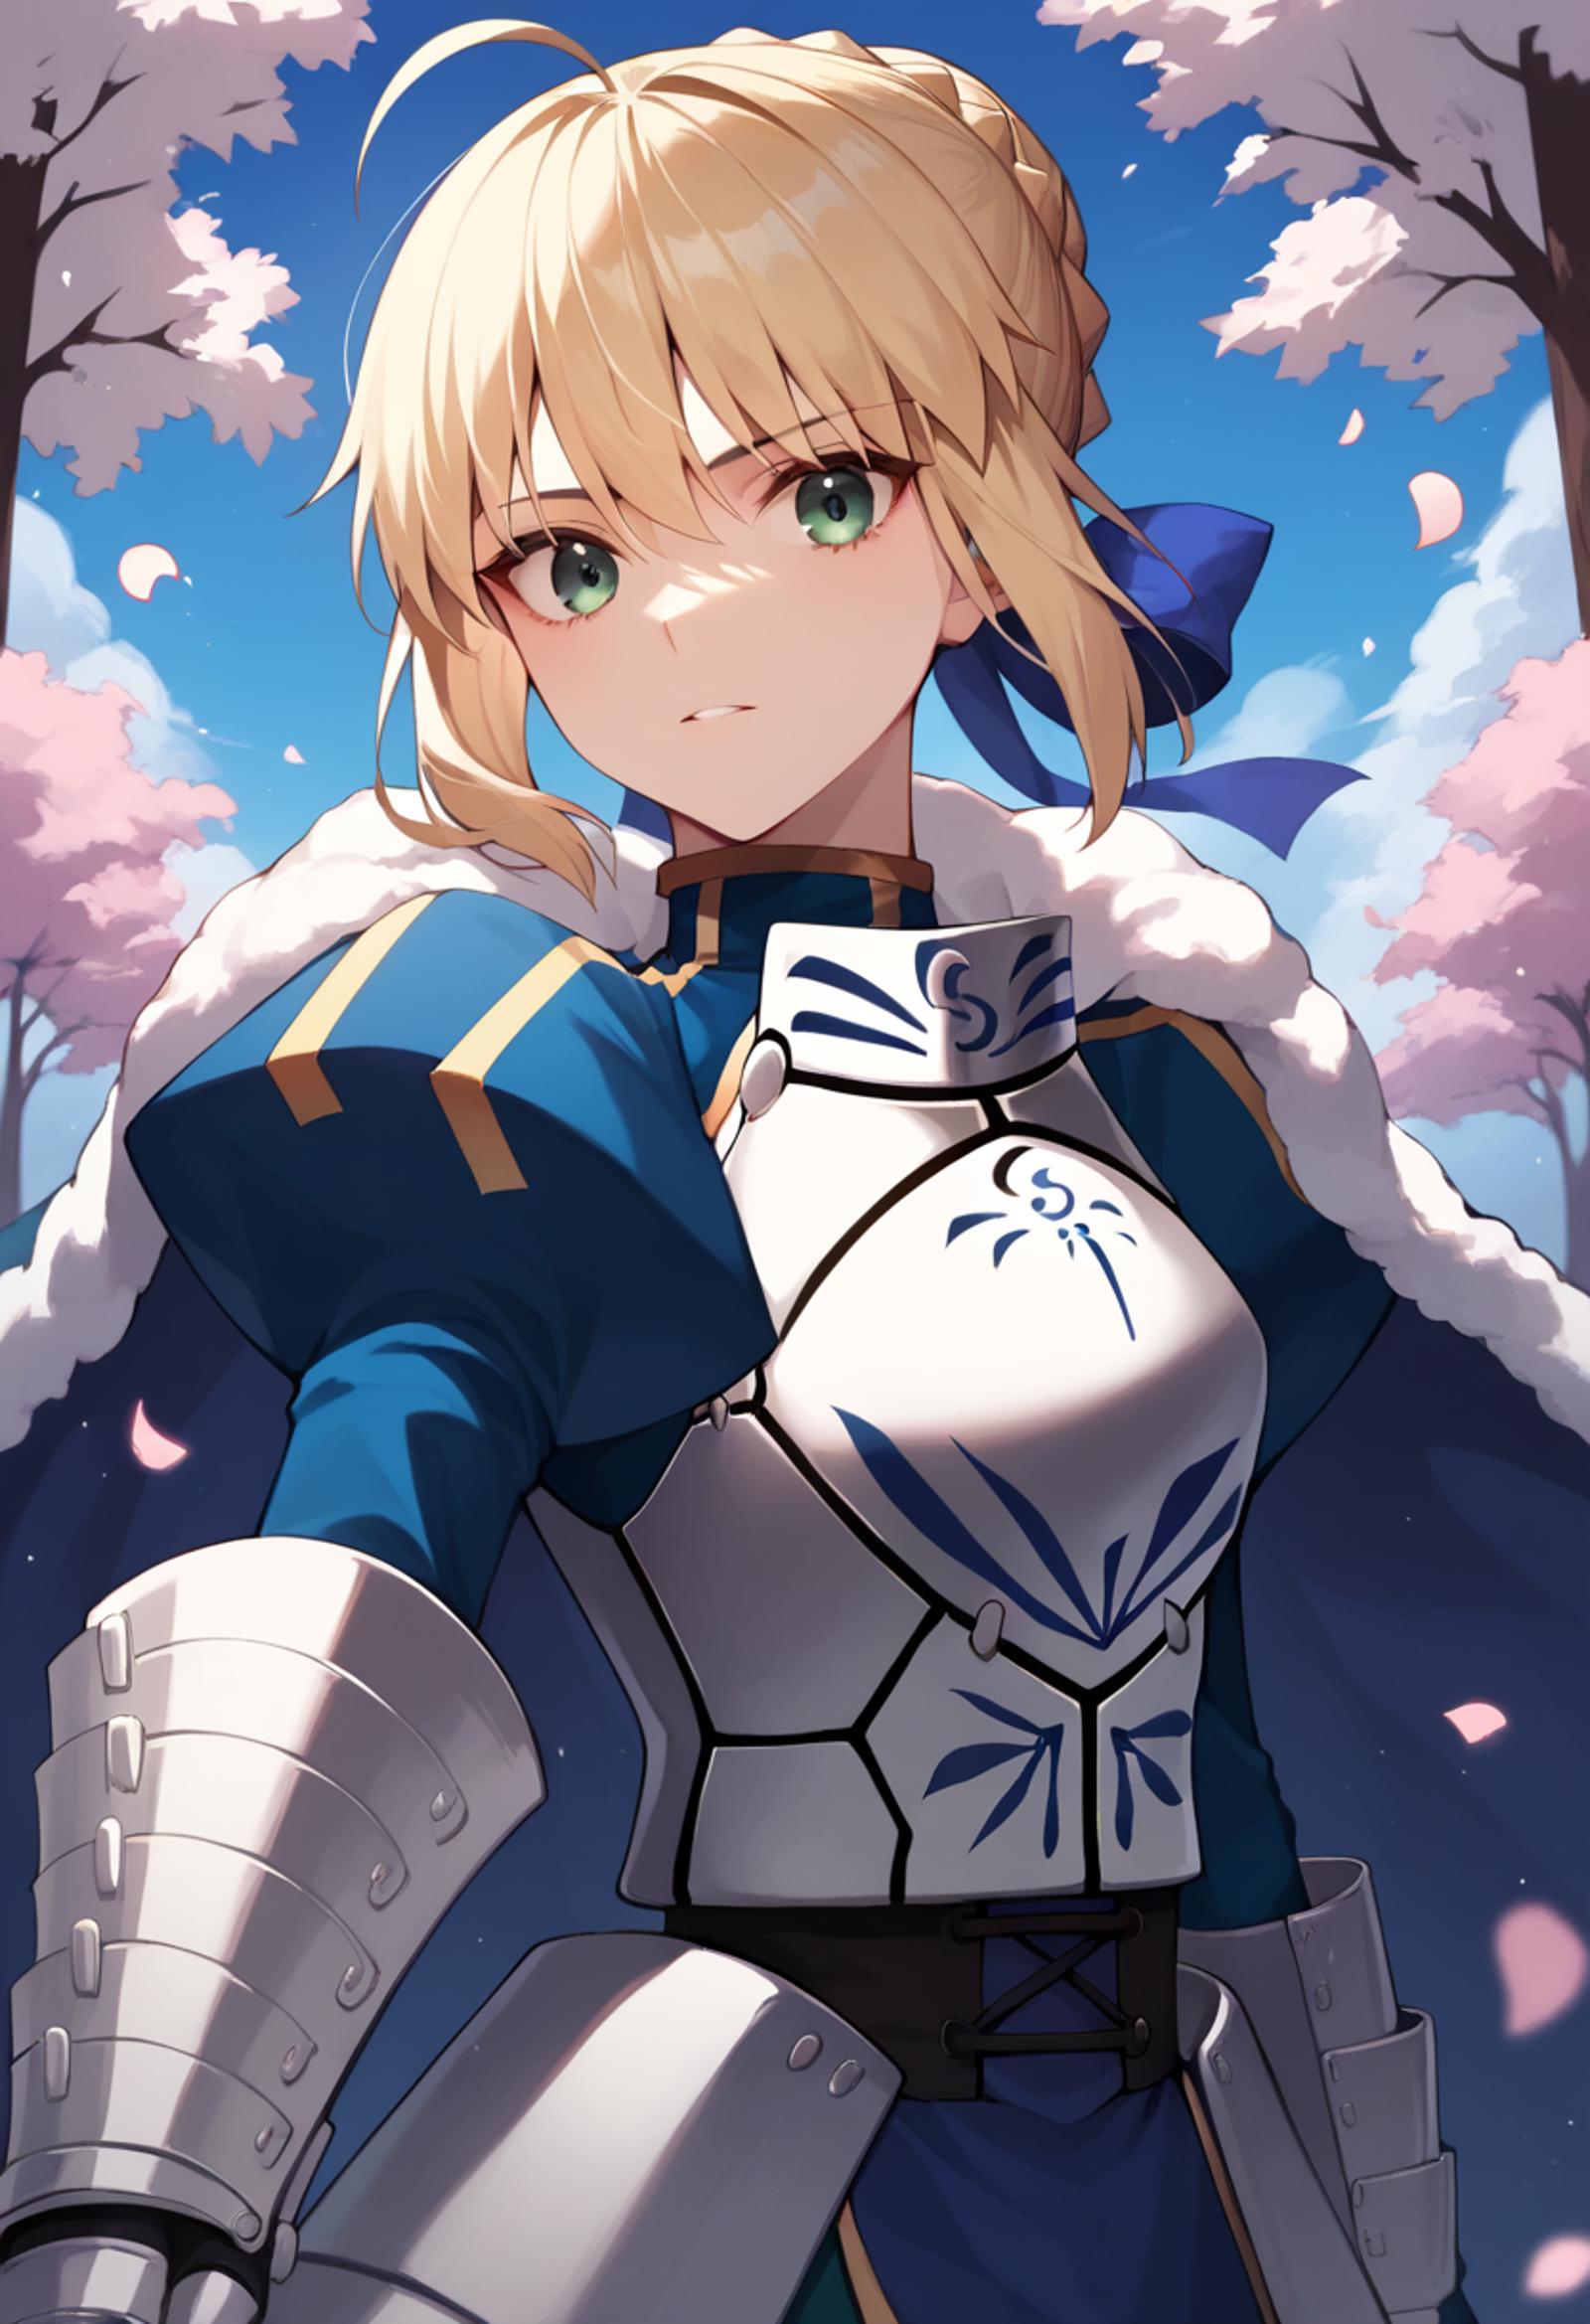 《Fate/stay night》全角色使用指南 Guide for All Characters in Fate/stay night